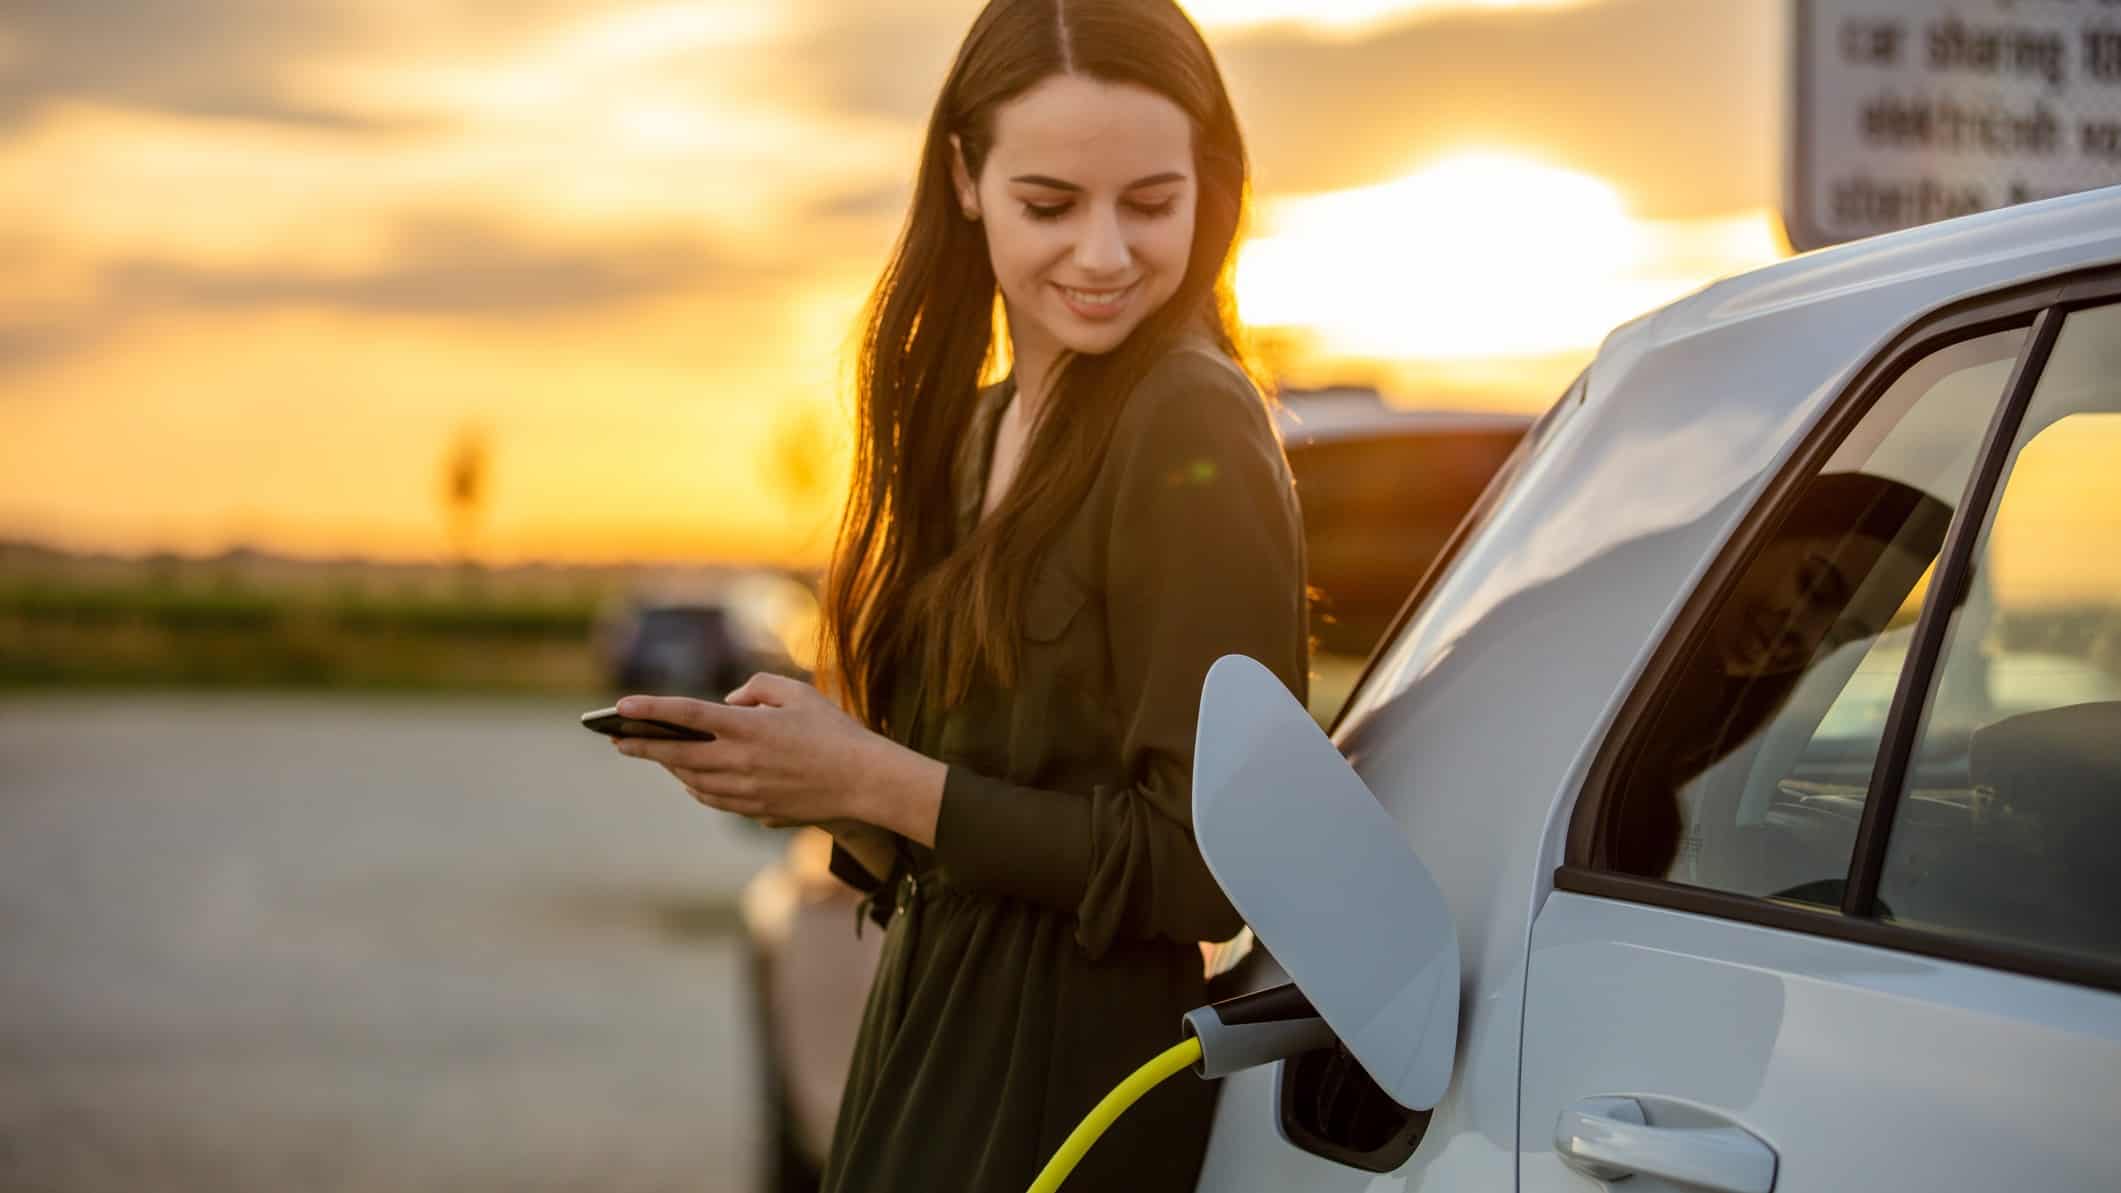 A woman smiles as she powers up her electric car